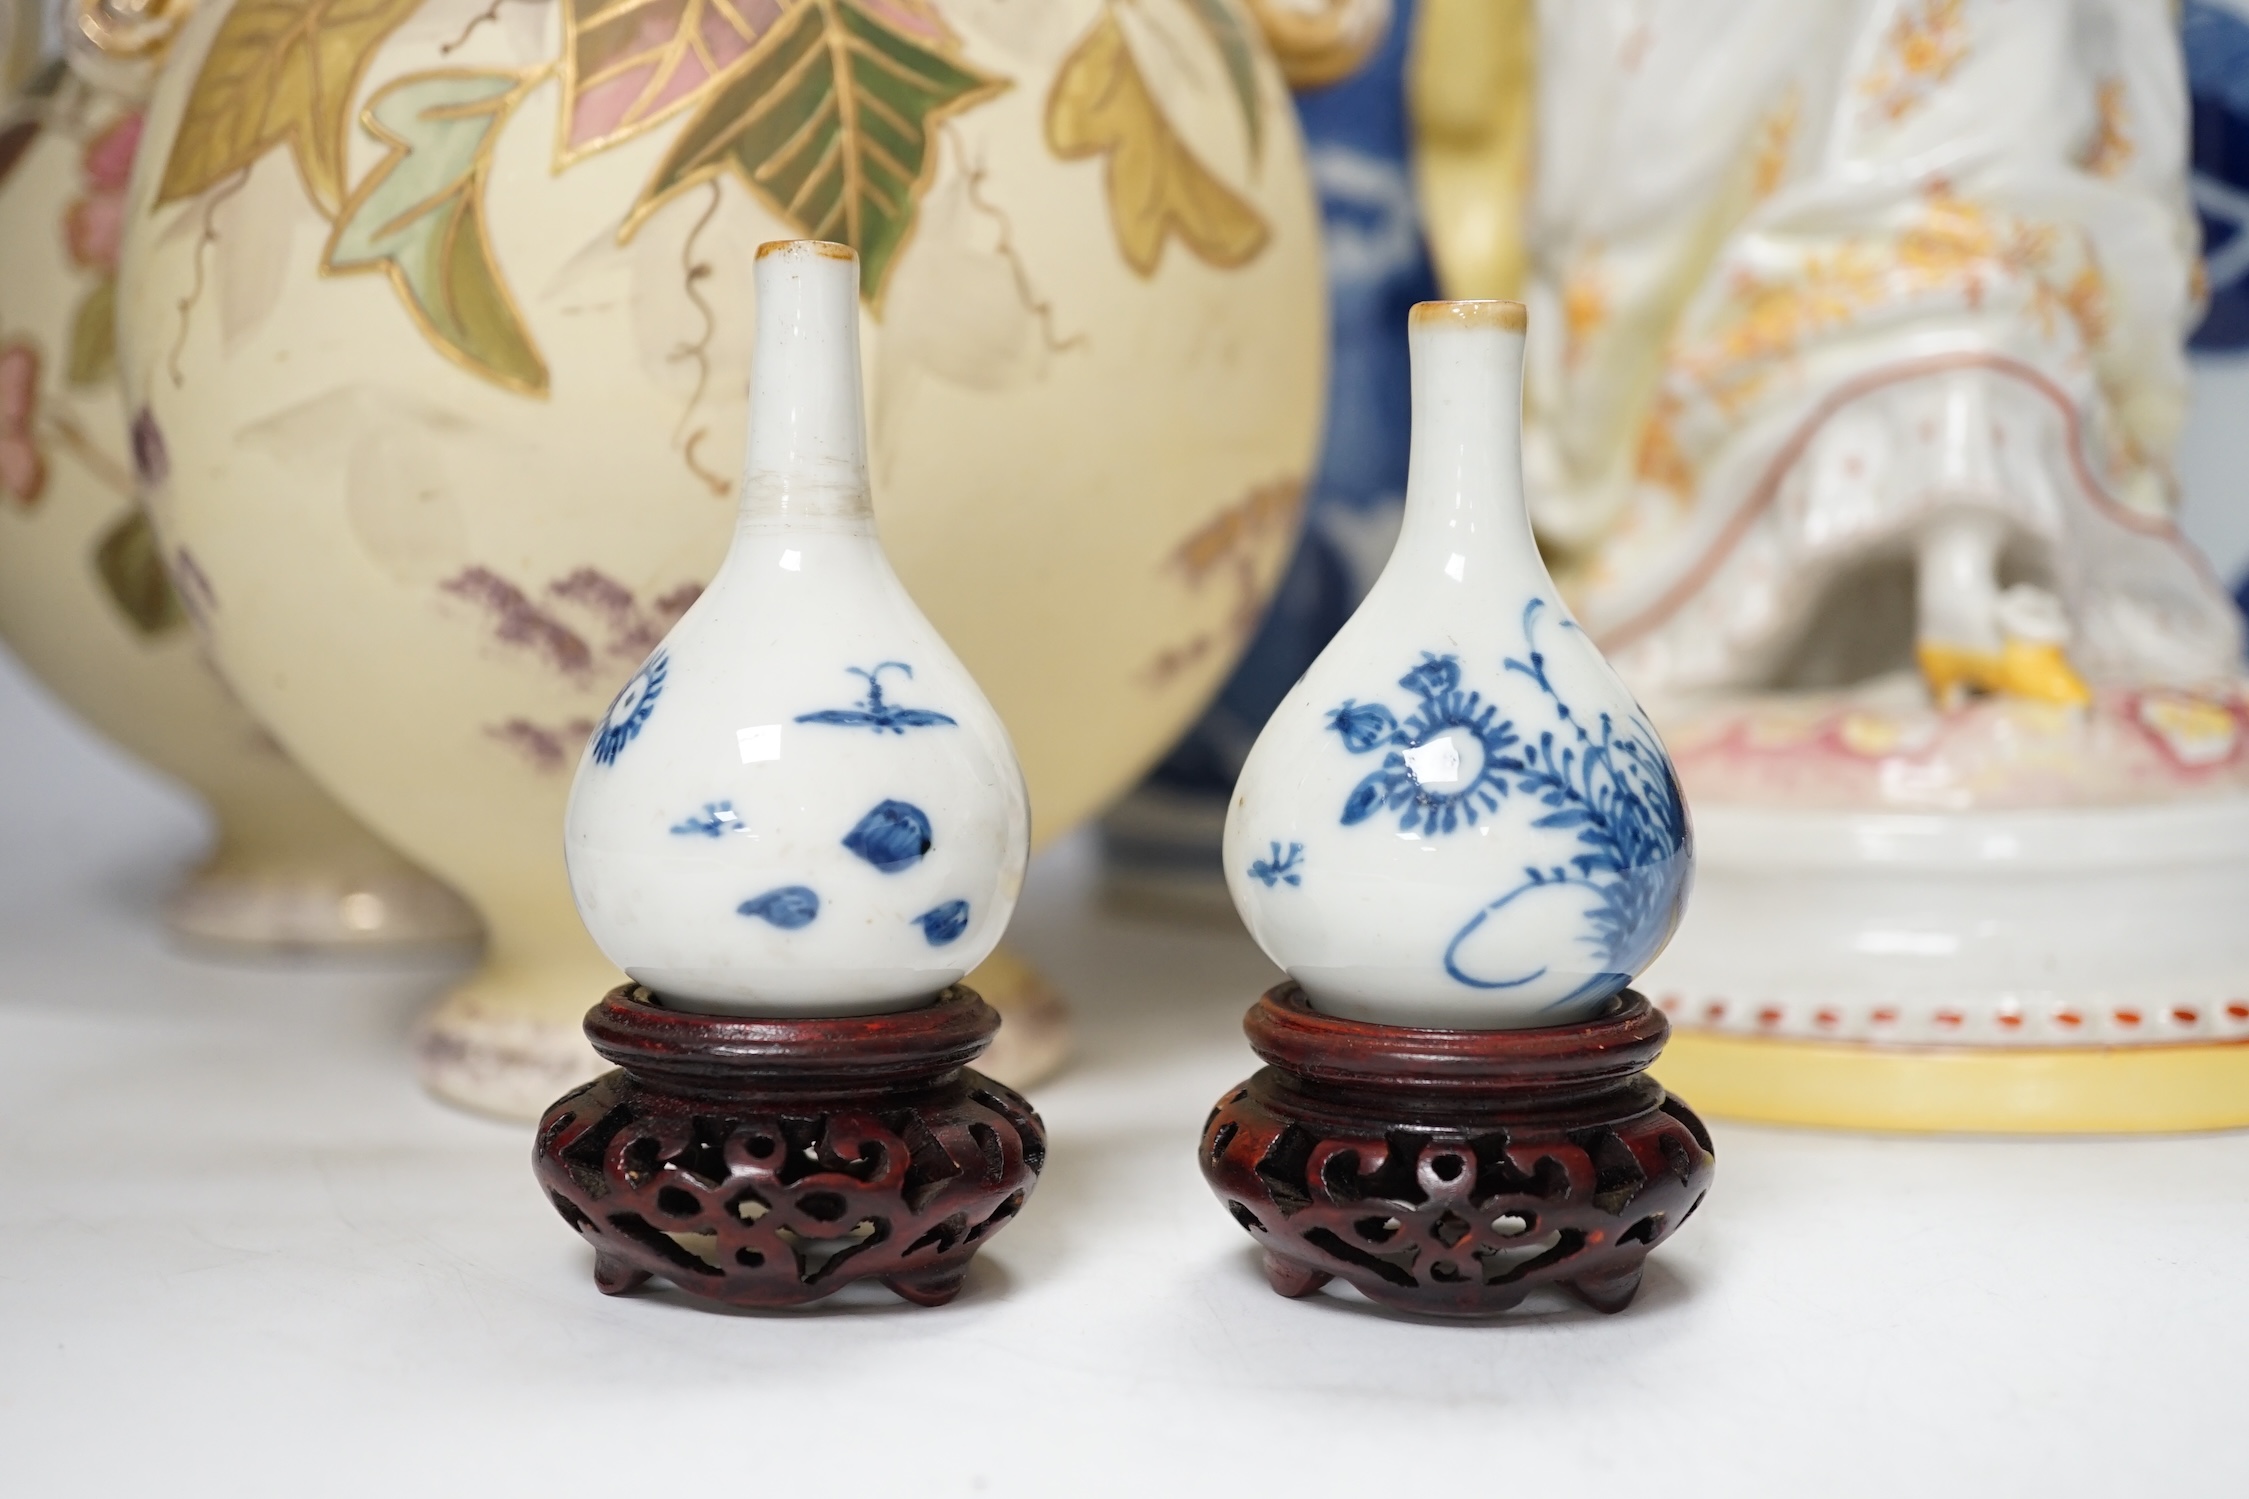 A late 19th century Continental figurine, two pairs of vases and a pair of Japanese miniature vases on stands, tallest 32cm high